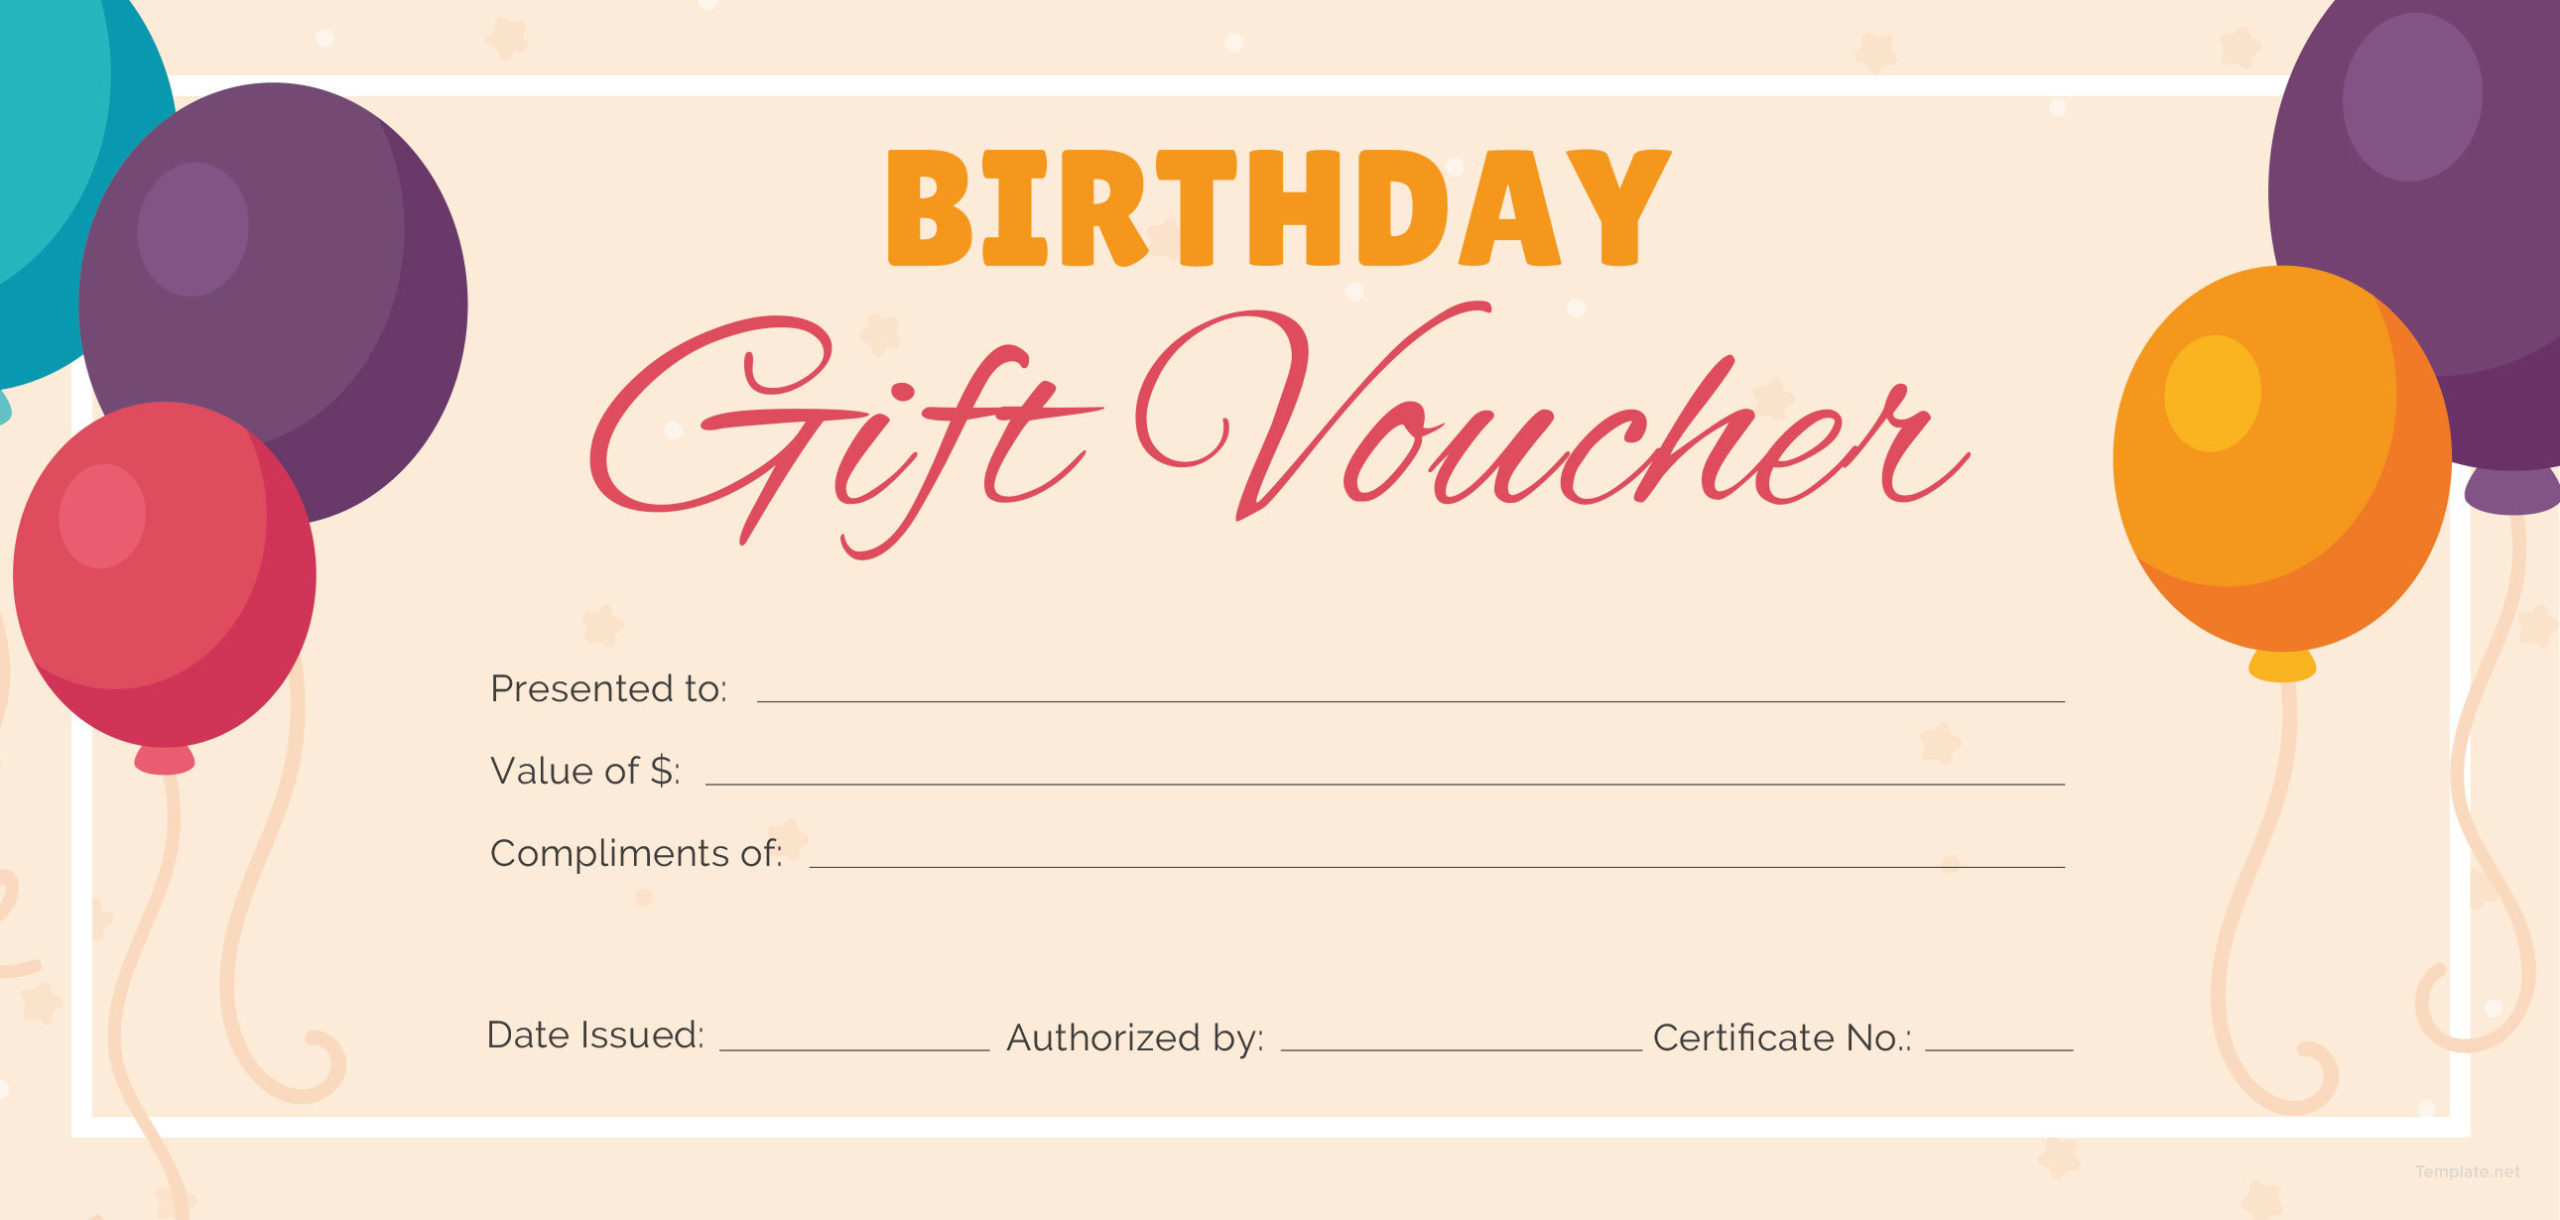 Free Birthday Gift Certificate Templates Certificate 